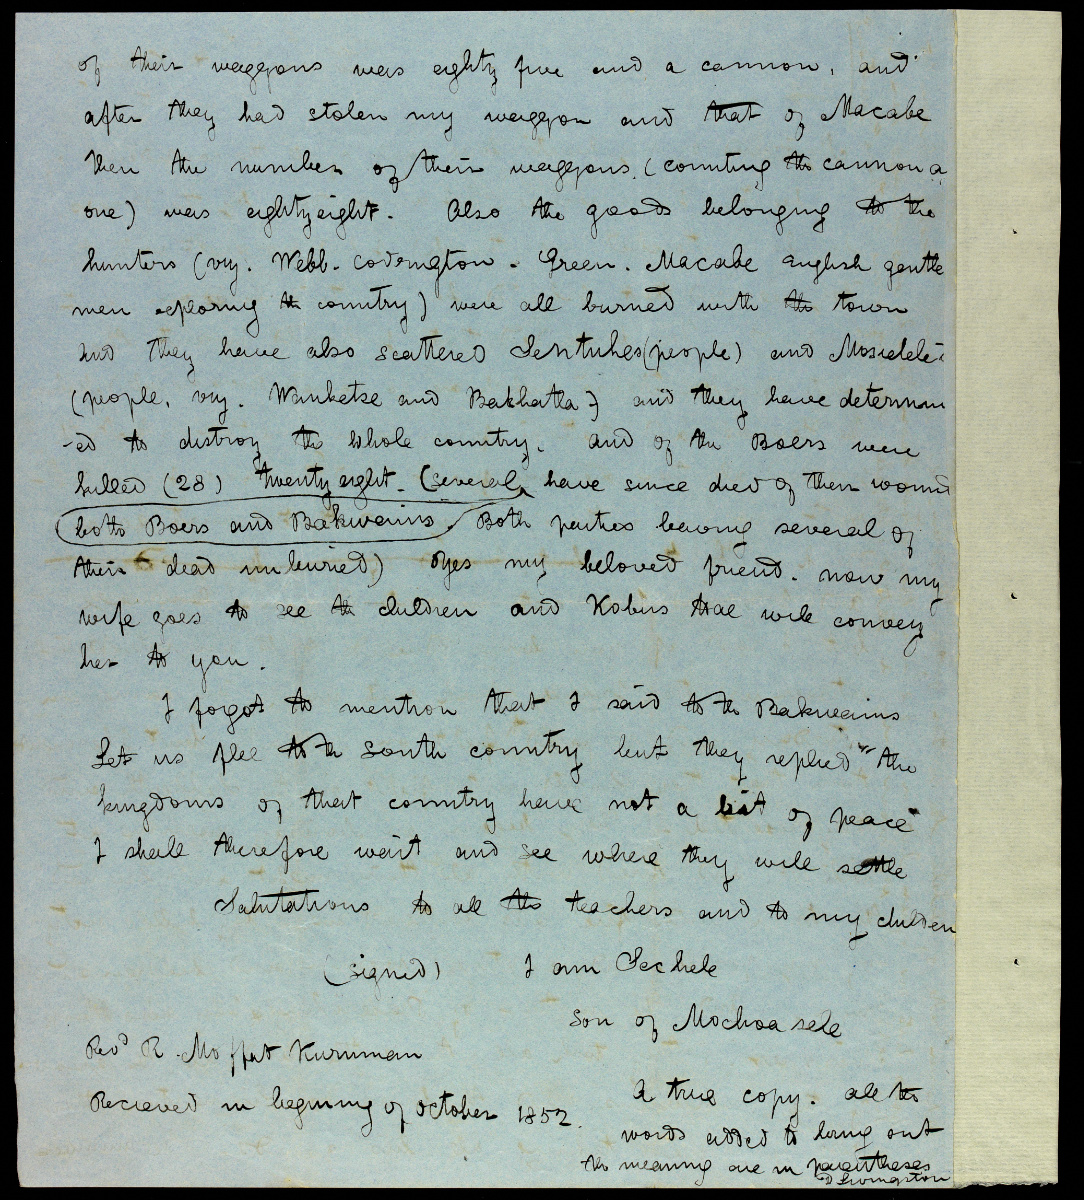 Letter to Robert Moffat I with Speech (Sechele and Livingstone 1852:[2]). Images from SOAS Library, University of London. Images copyright Council for World Mission. Used by permission for private study, educational or research purposes only. Please contact SOAS Archives & Special Collections on docenquiry@soas.ac.uk for permission to use this material for any other purpose. As relevant, copyright Dr. Neil Imray Livingstone Wilson. Creative Commons Attribution-NonCommercial 3.0 Unported (https://creativecommons.org/licenses/by-nc/3.0/).